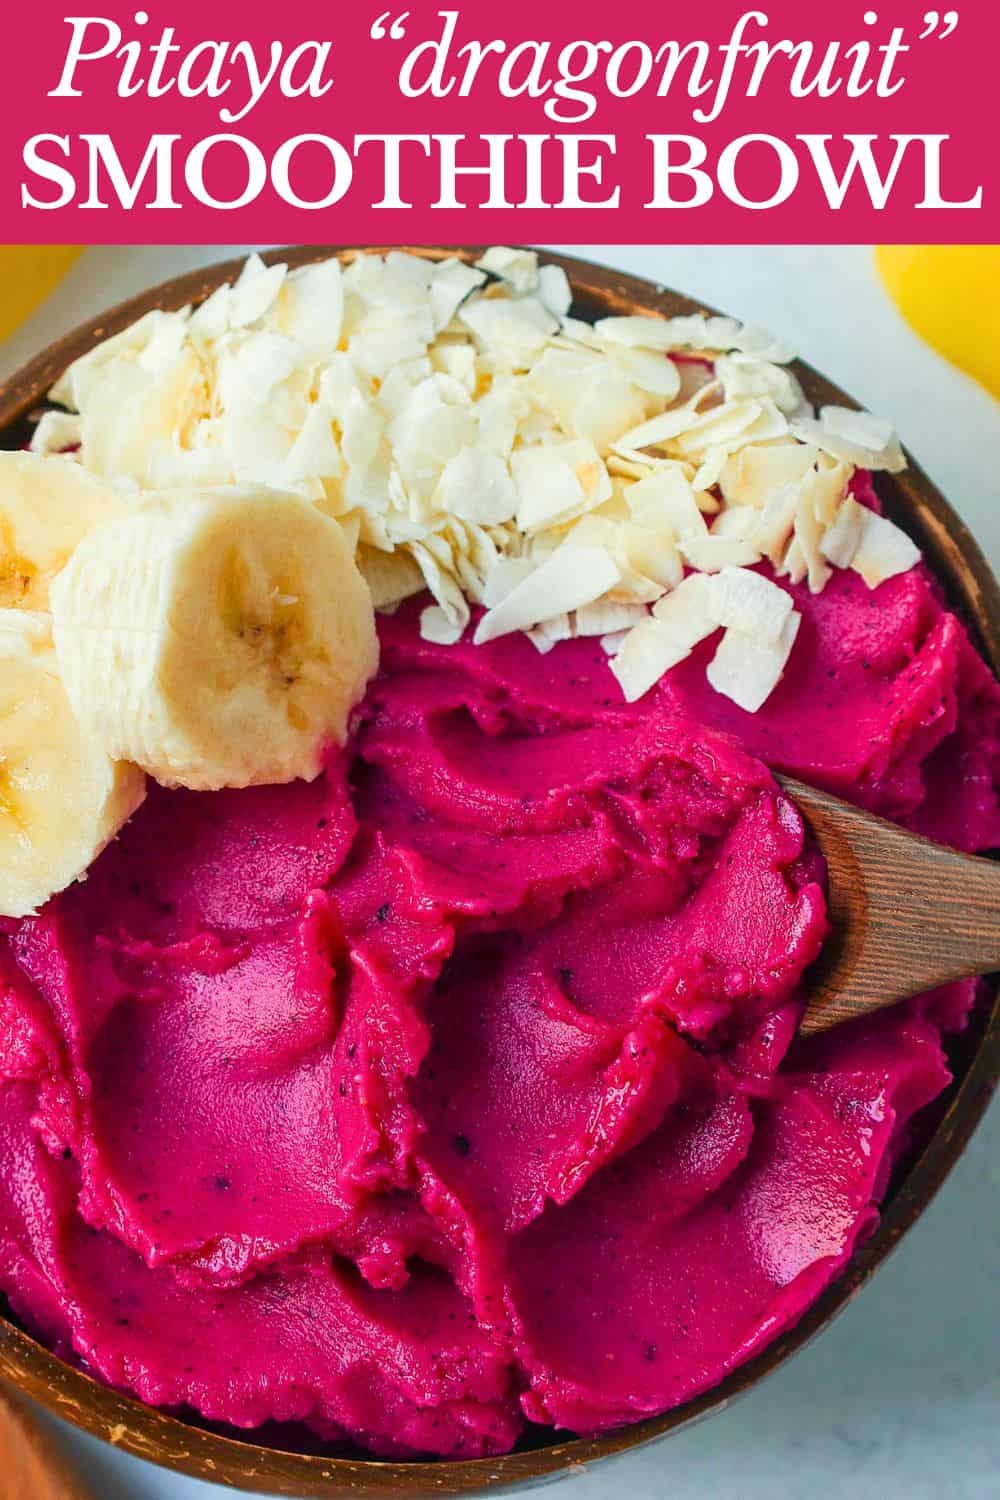 Dragon fruit (pitaya) smoothie bowls are a creamy frozen blend of tropical fruits topped with granolas, seeds, and other toppings that will give you healthy energy throughout the day.